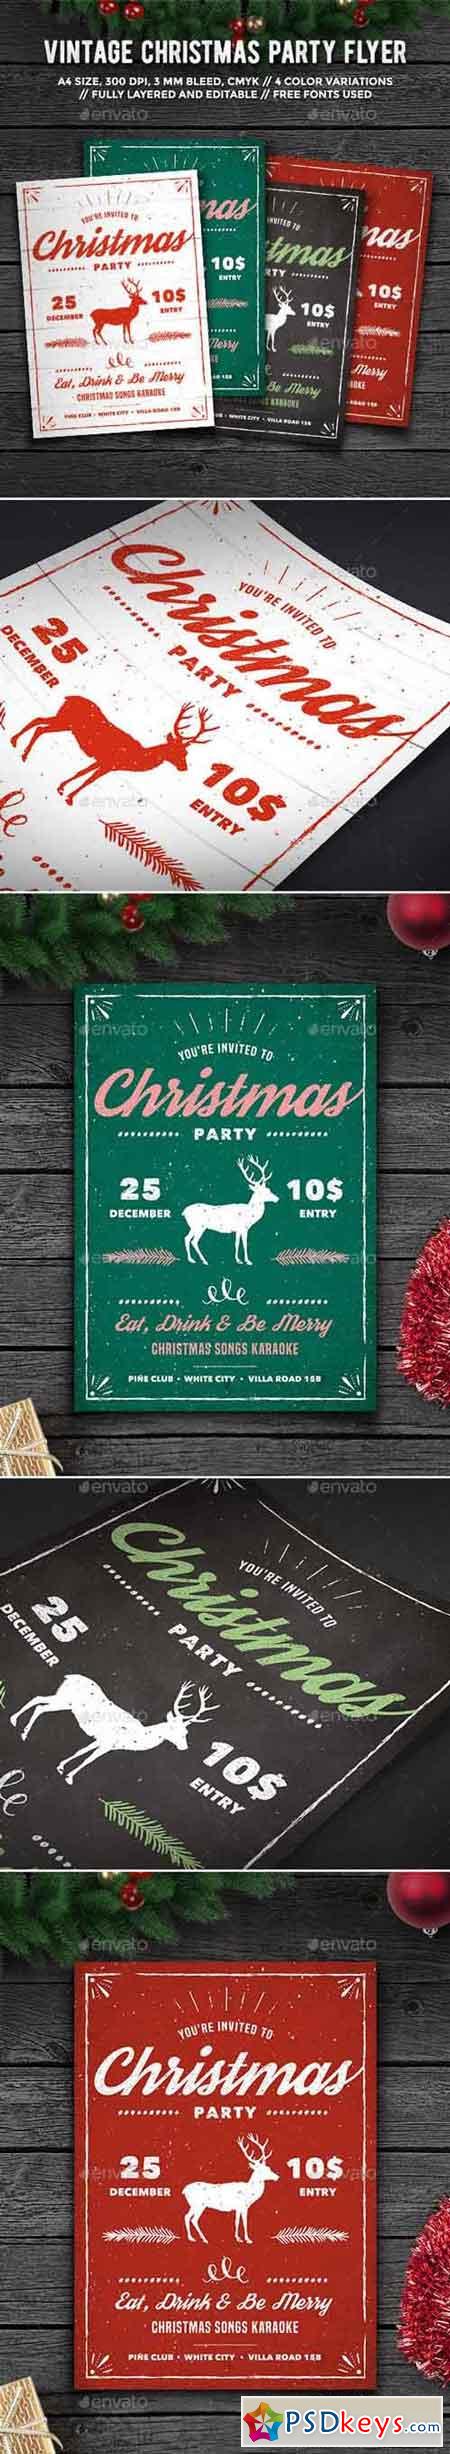 Vintage Christmas Party Flyer 13839276